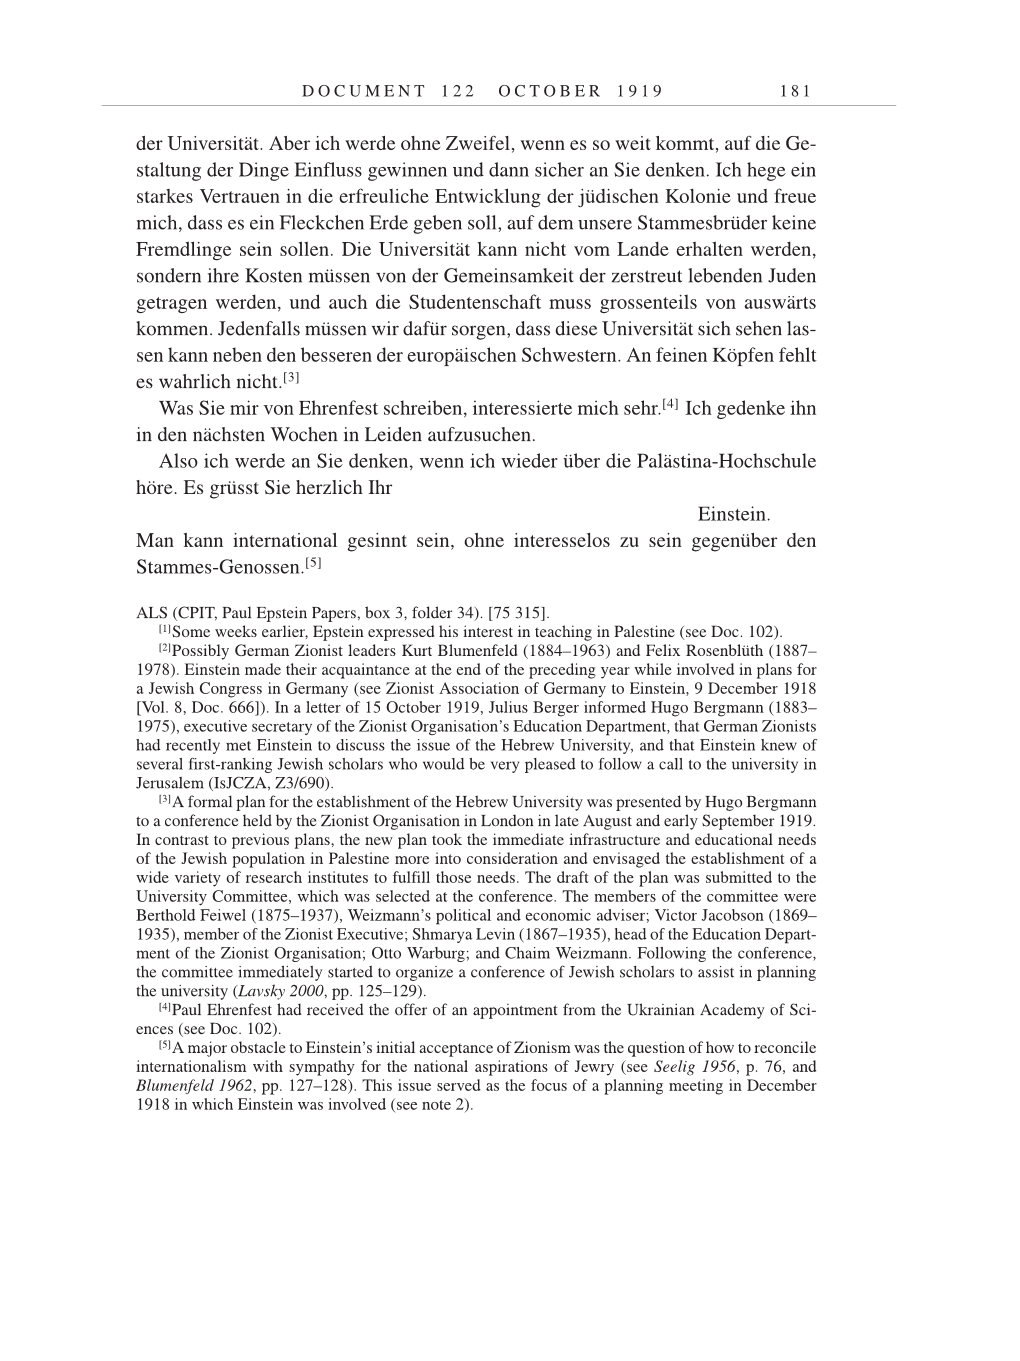 Volume 9: The Berlin Years: Correspondence January 1919-April 1920 page 181